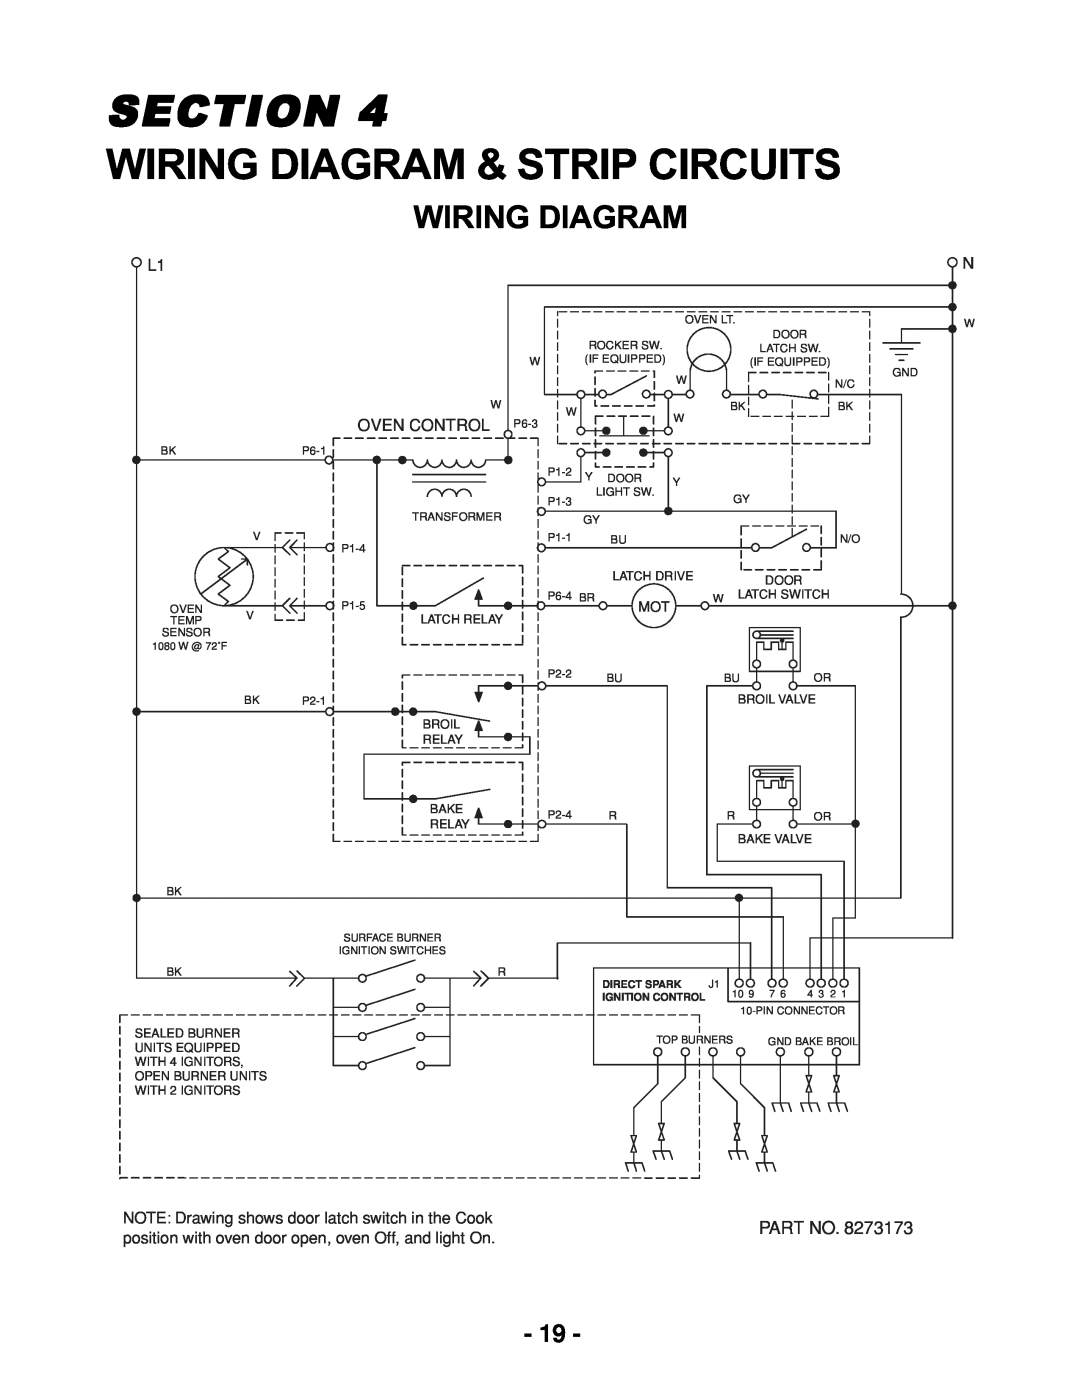 Whirlpool KR-28 manual Wiring Diagram & Strip Circuits, Section, Oven Control 